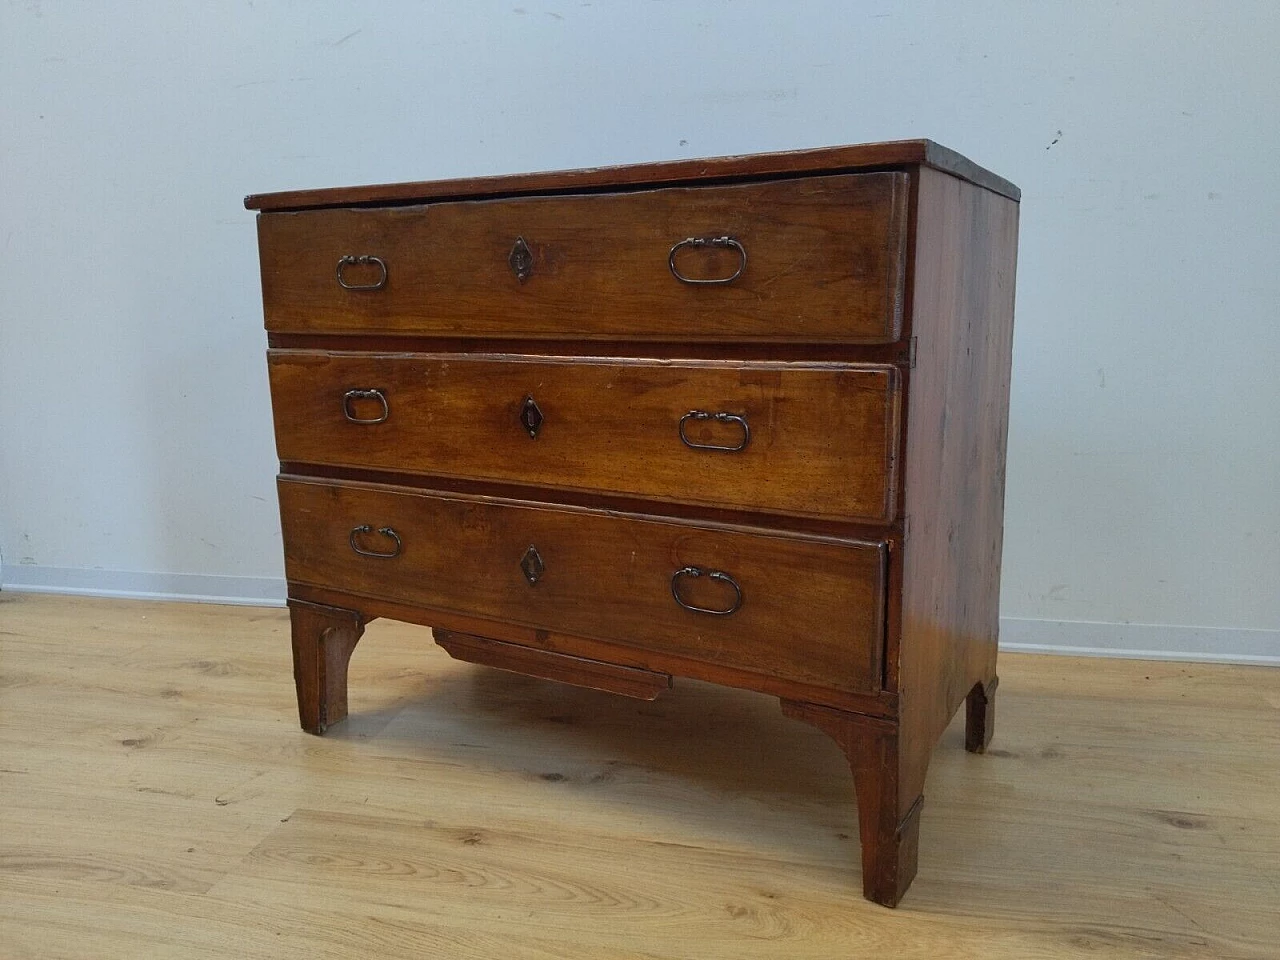 Walnut and fir chest of drawers, mid-19th century 16